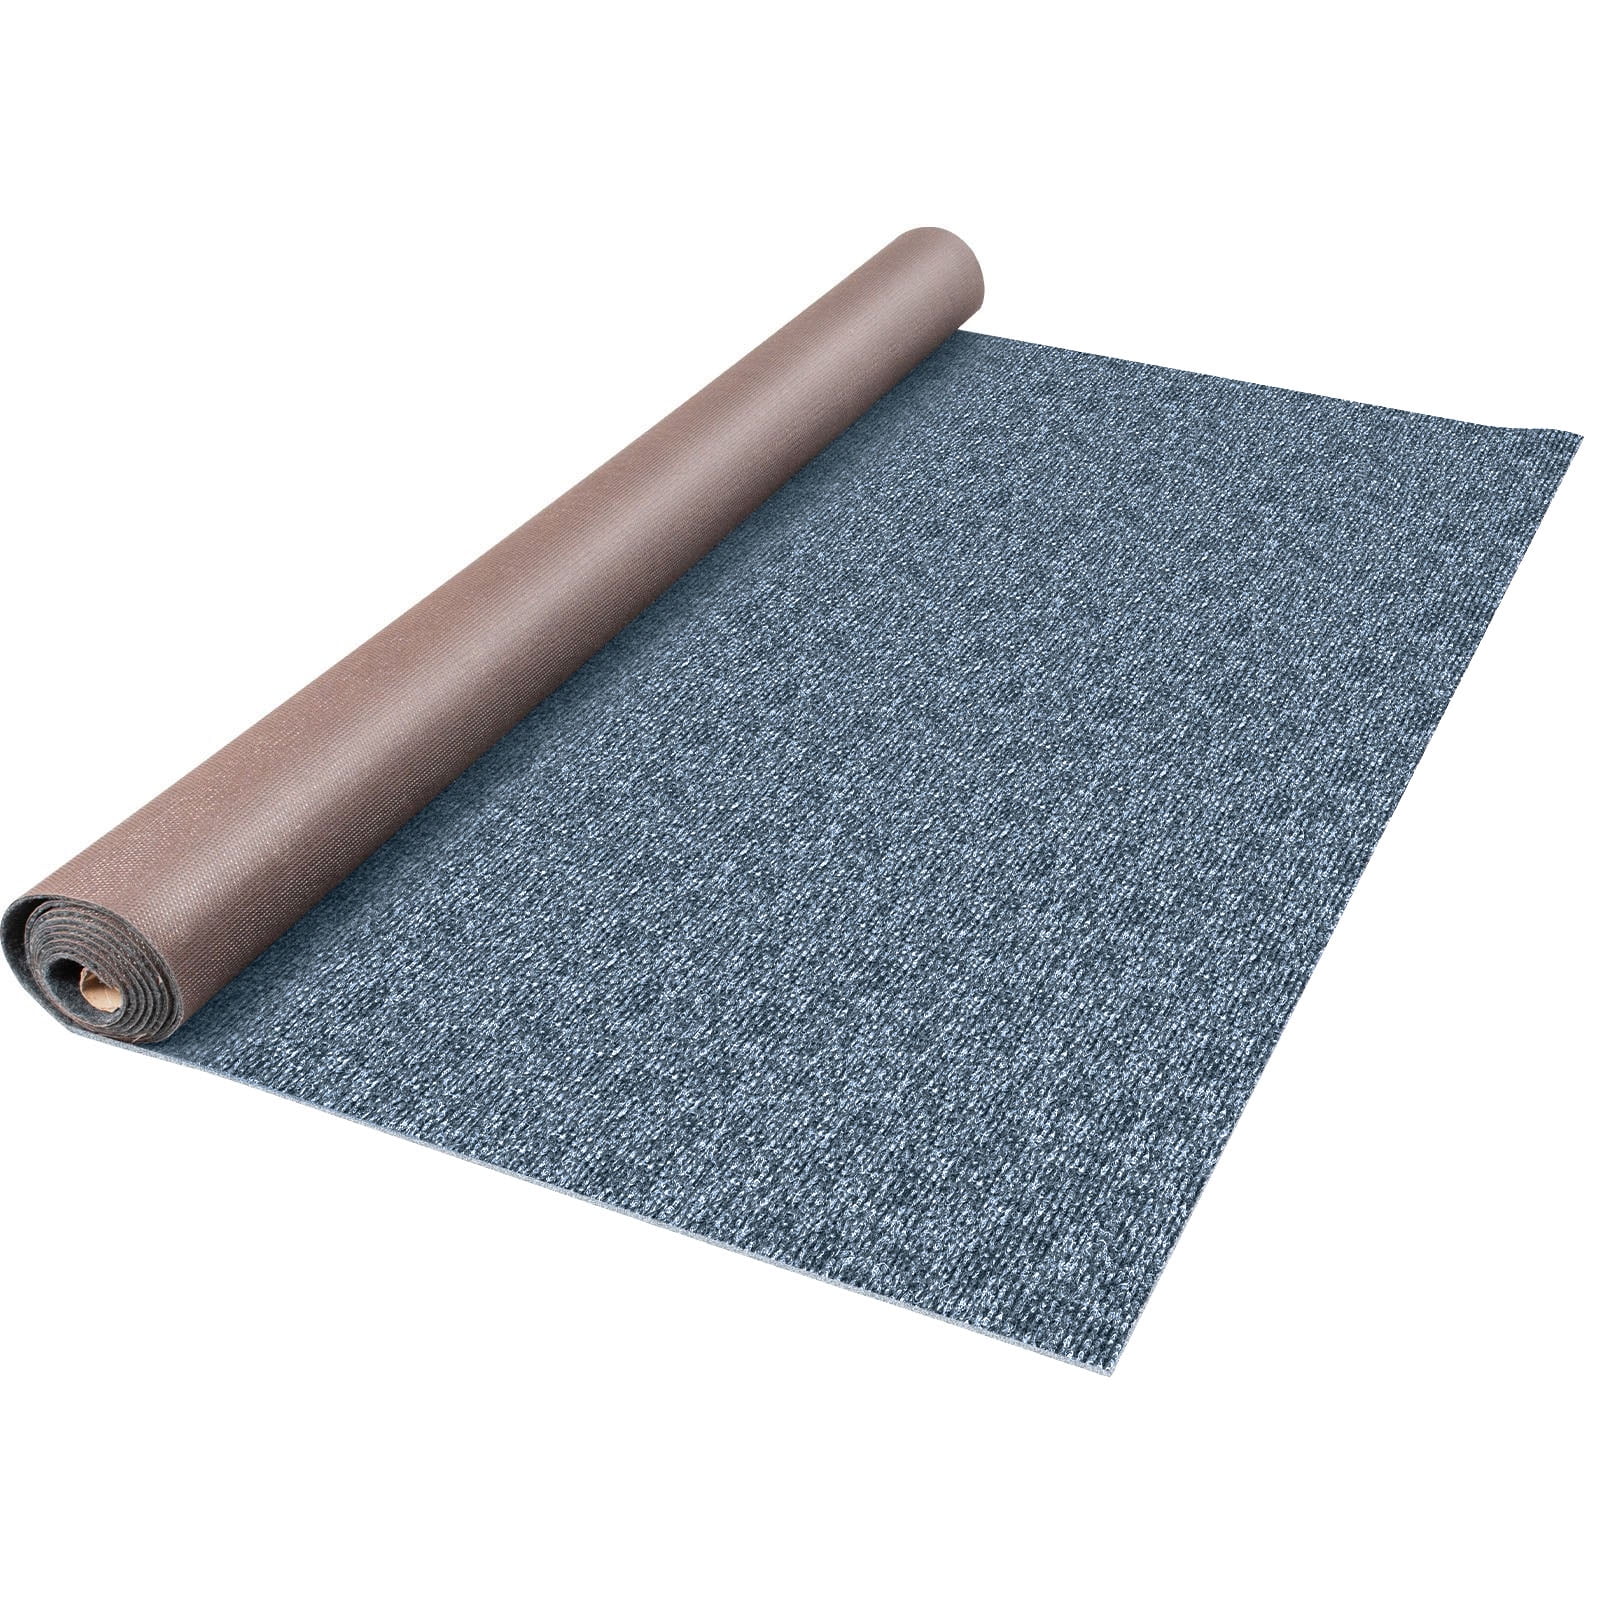 Heavy-Duty Ribbed Indoor/Outdoor Carpet with Rubber Marine Backing -  Charcoal Black 6' x 30' - Several Sizes Available - Carpet Flooring for  Patio